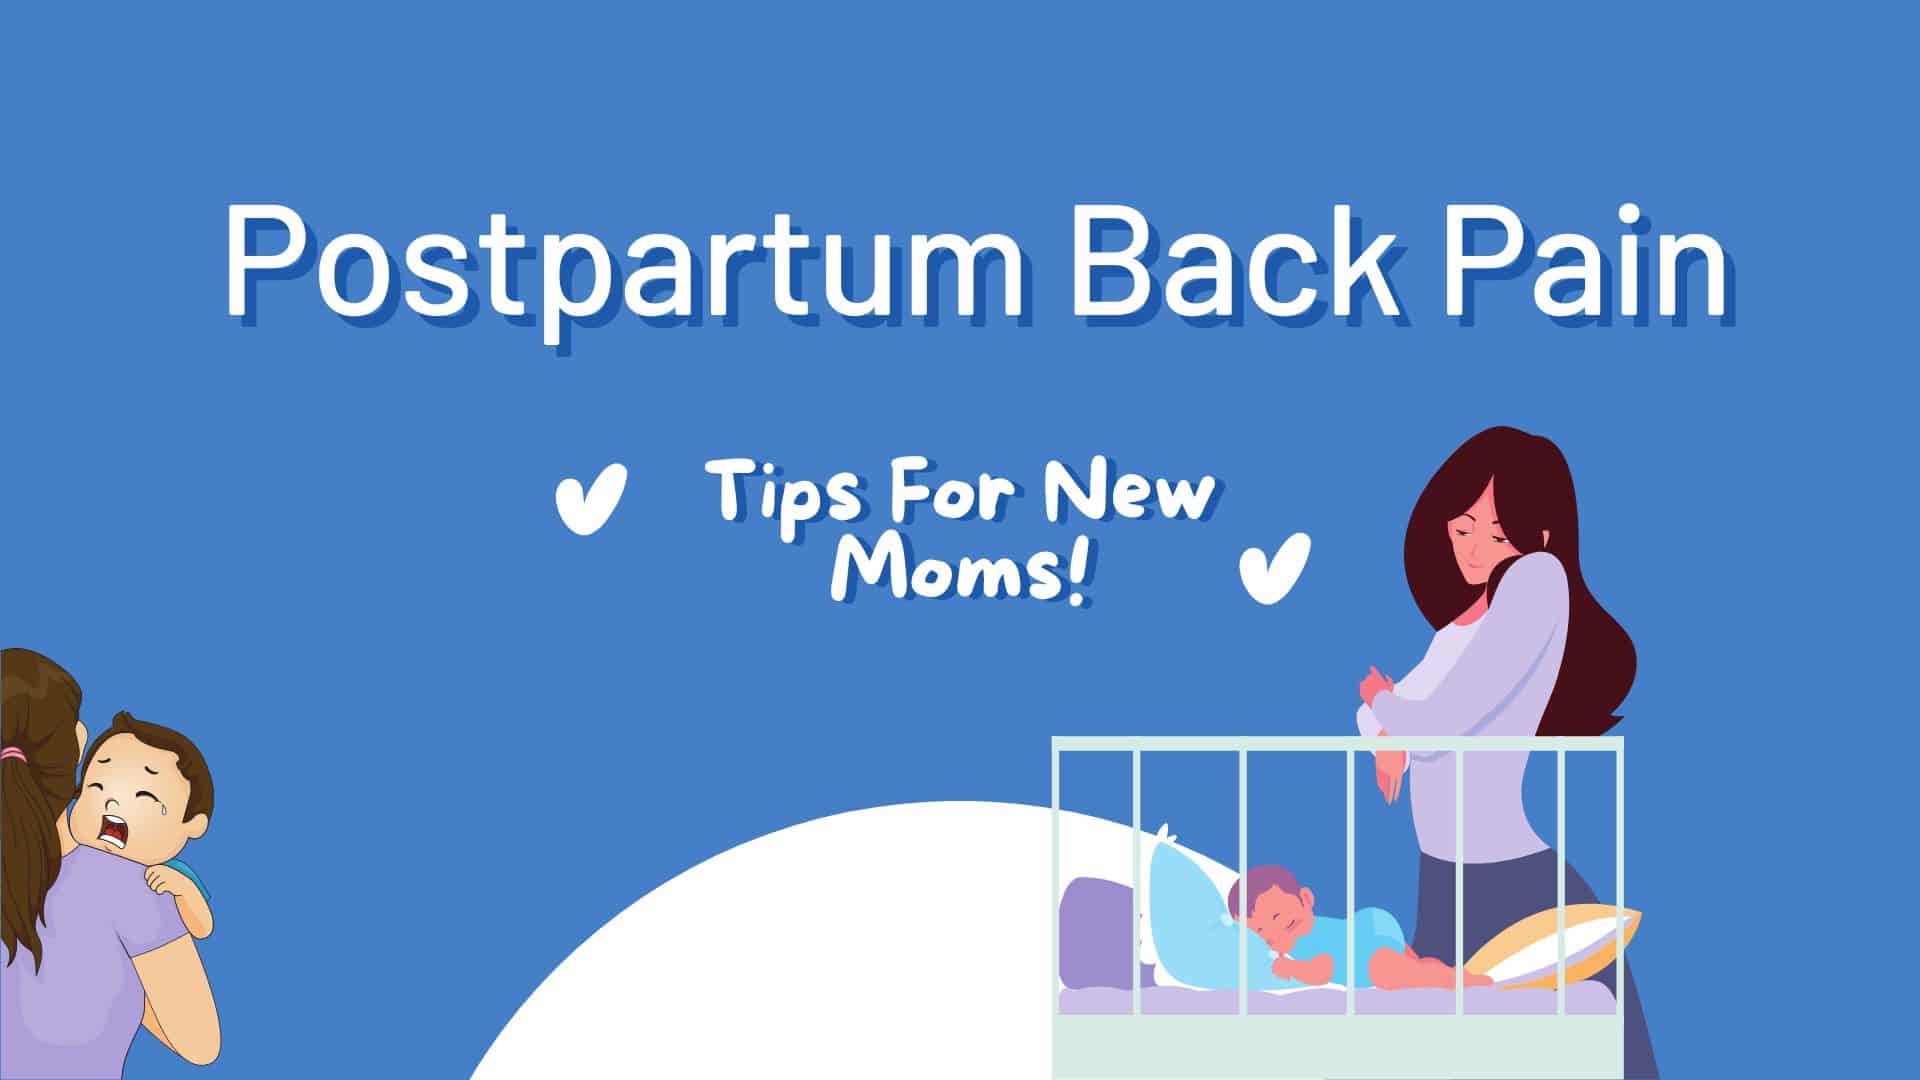 Postpartum Care: Caring for Your Health After Childbirth